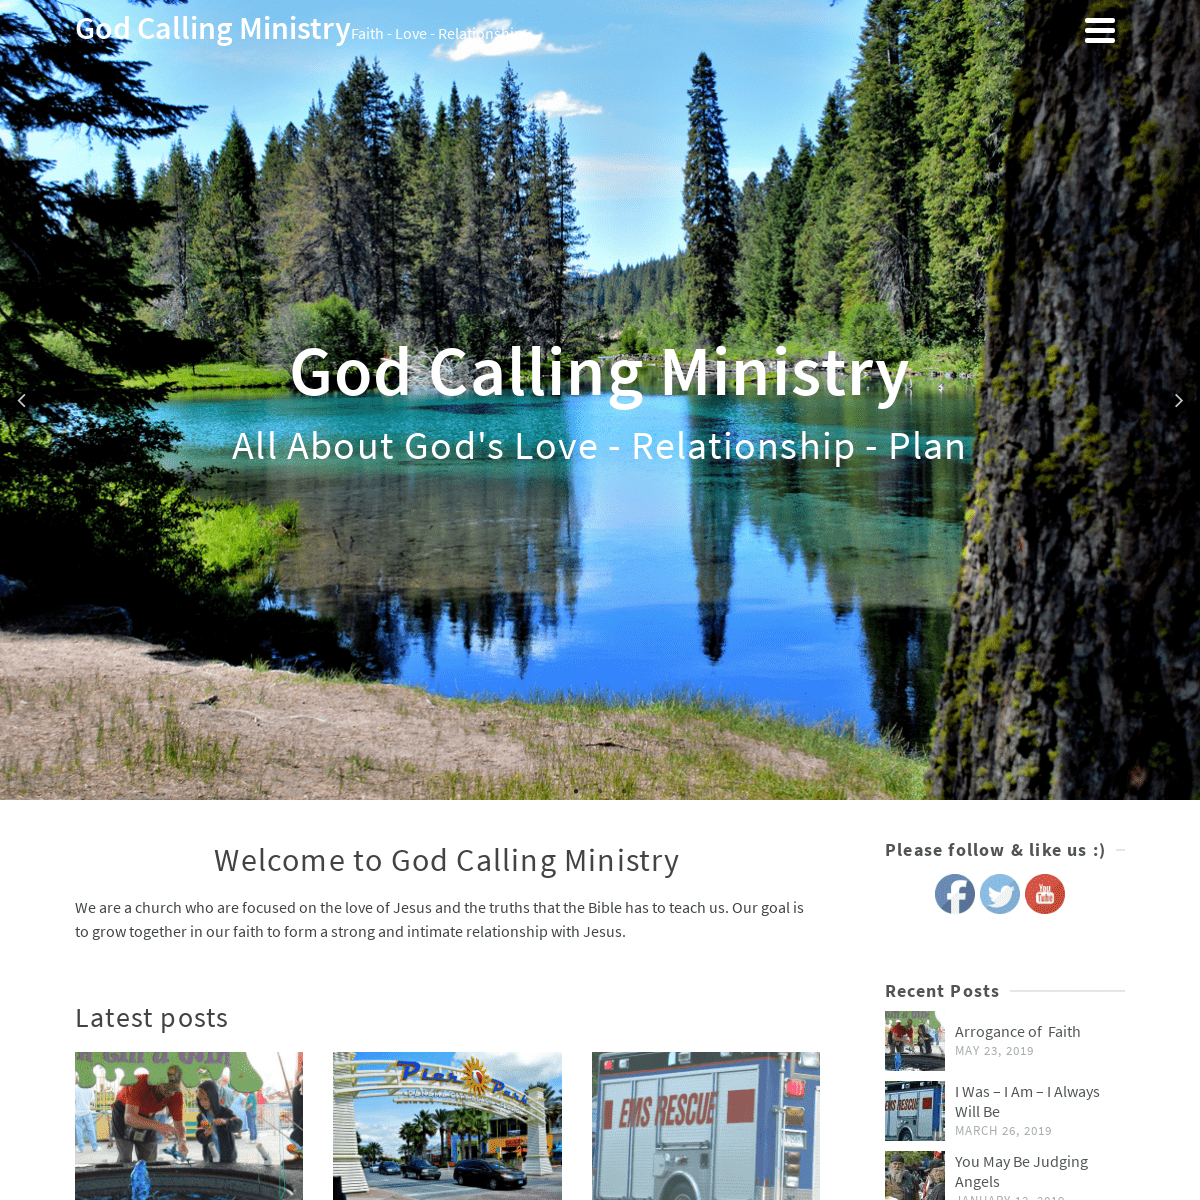 A complete backup of https://godcallingministry.com